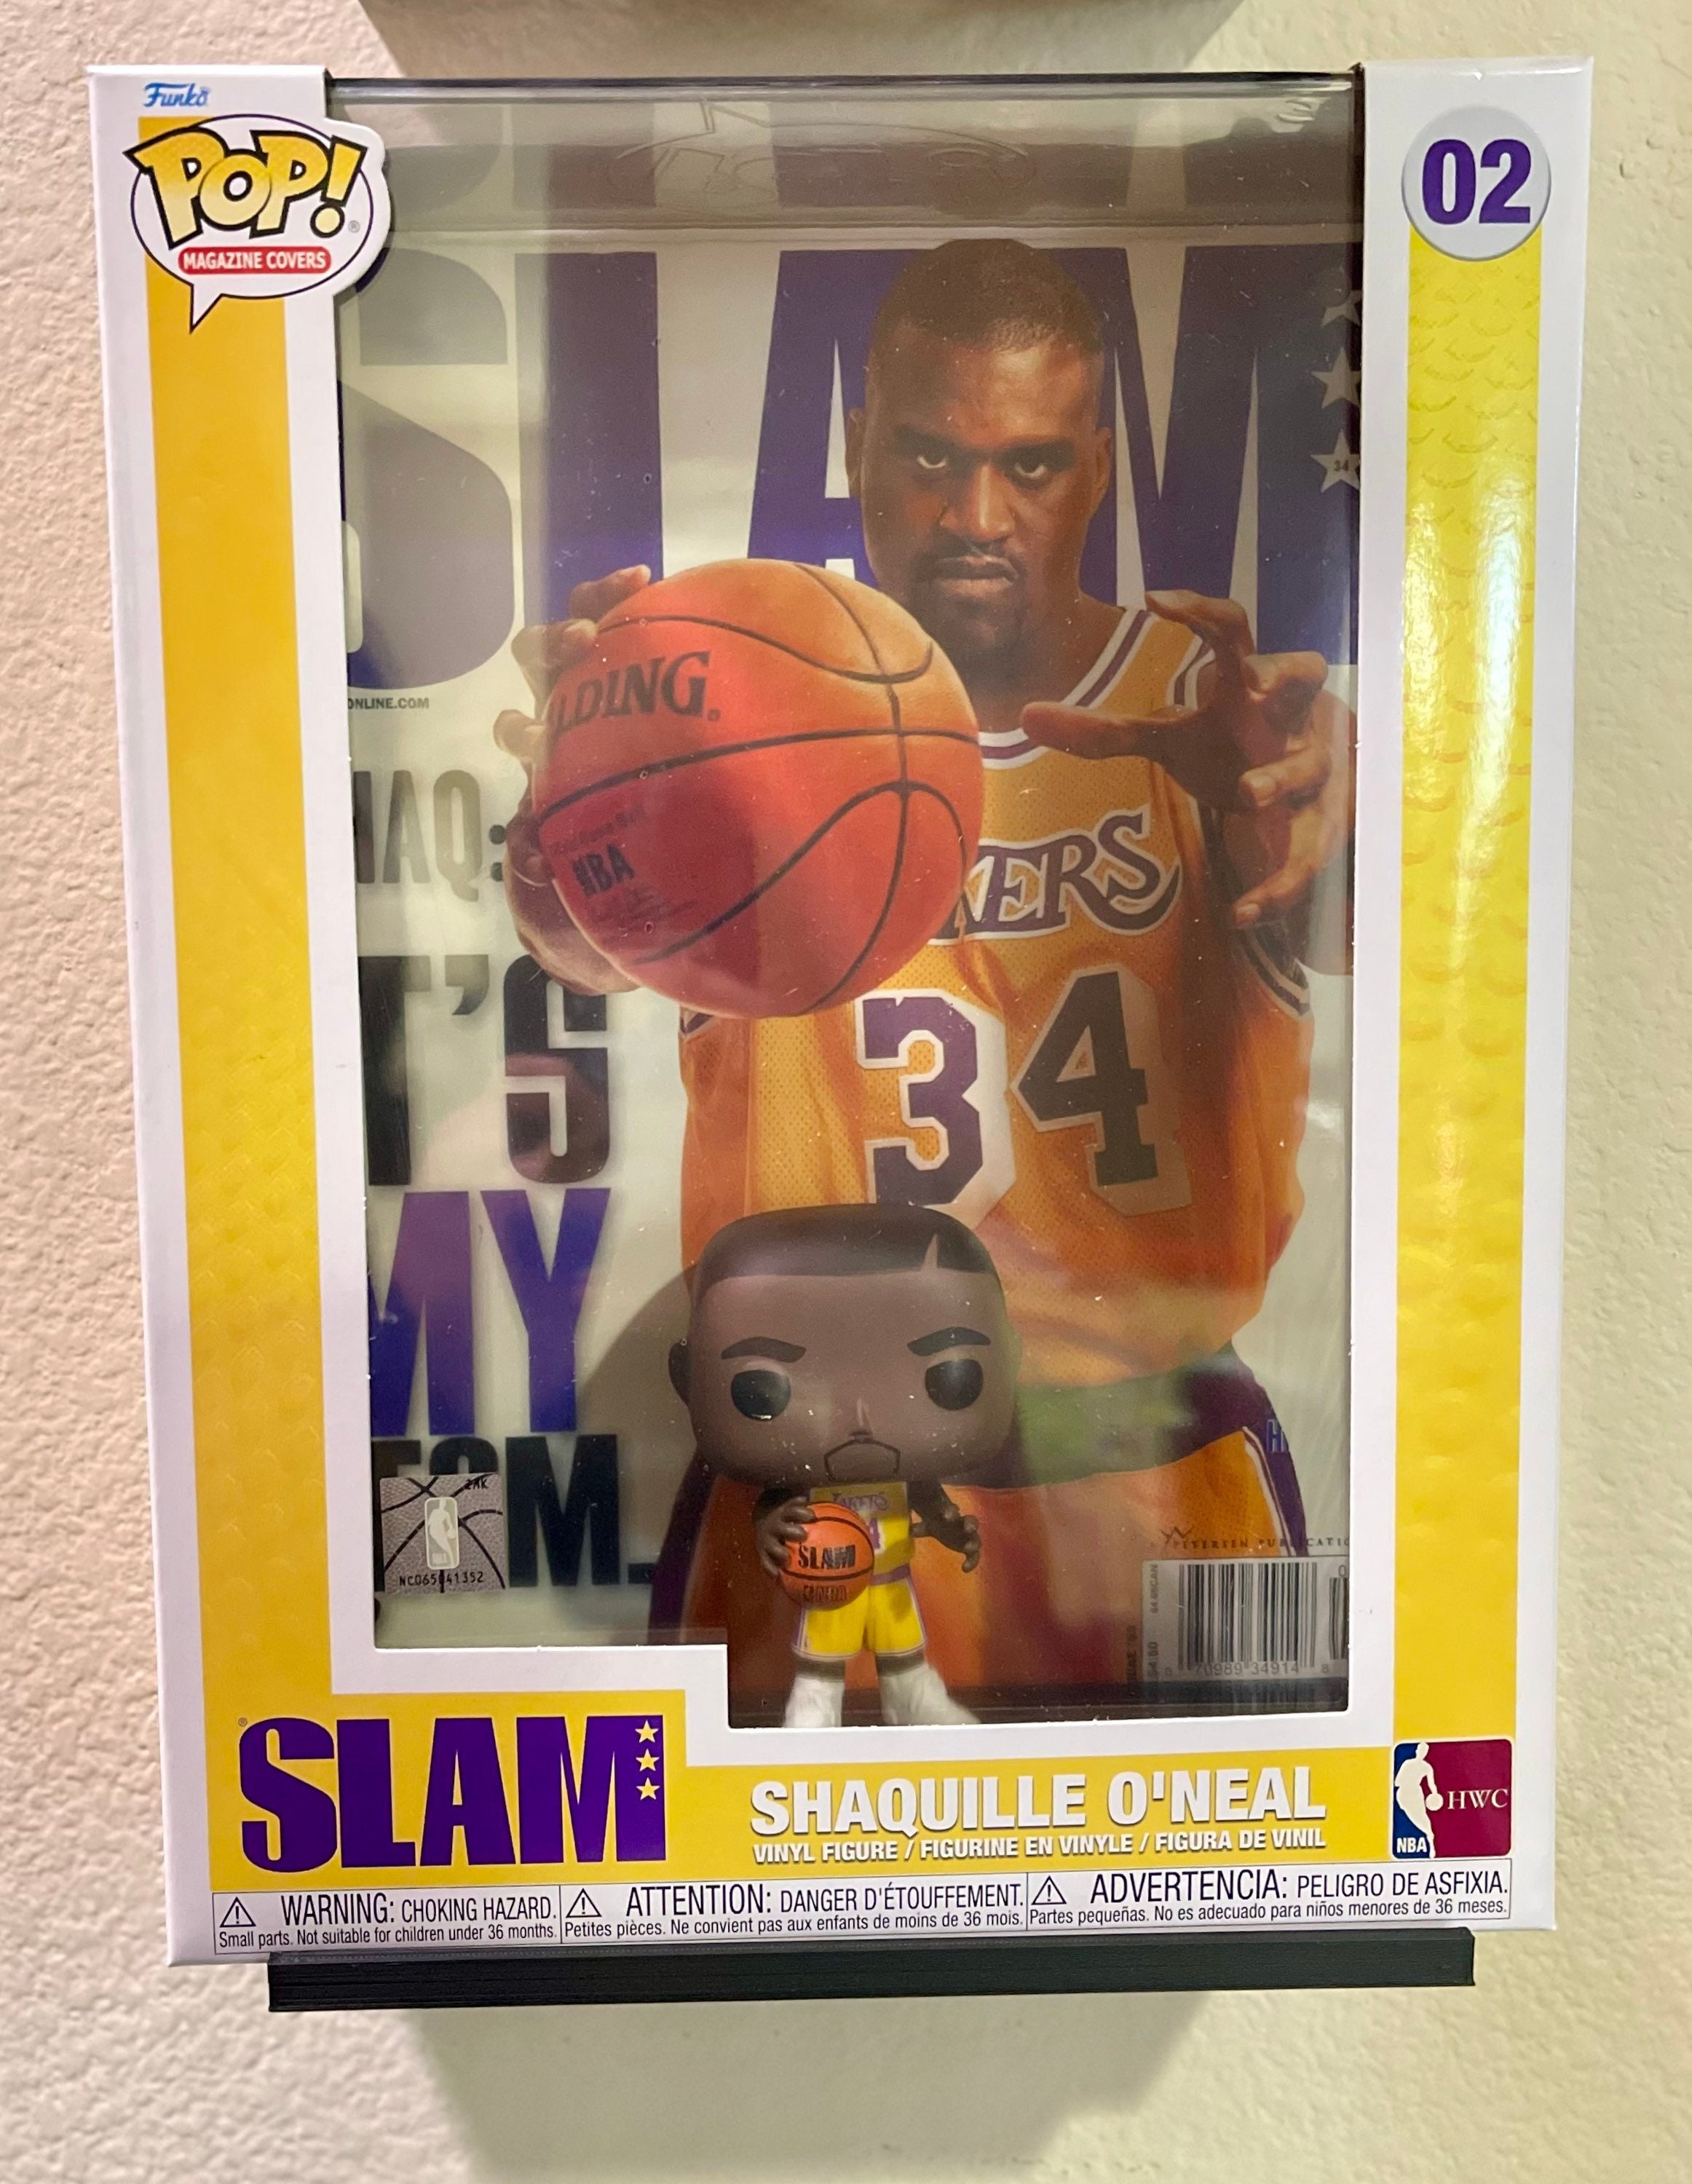 FUNKO TIME. Vince Carter Funko Pop! SLAM Magazine Cover is now HERE. Pair  this classic up and add to your collection with these Premium Vinyl and POP!, By NBA Store Philippines